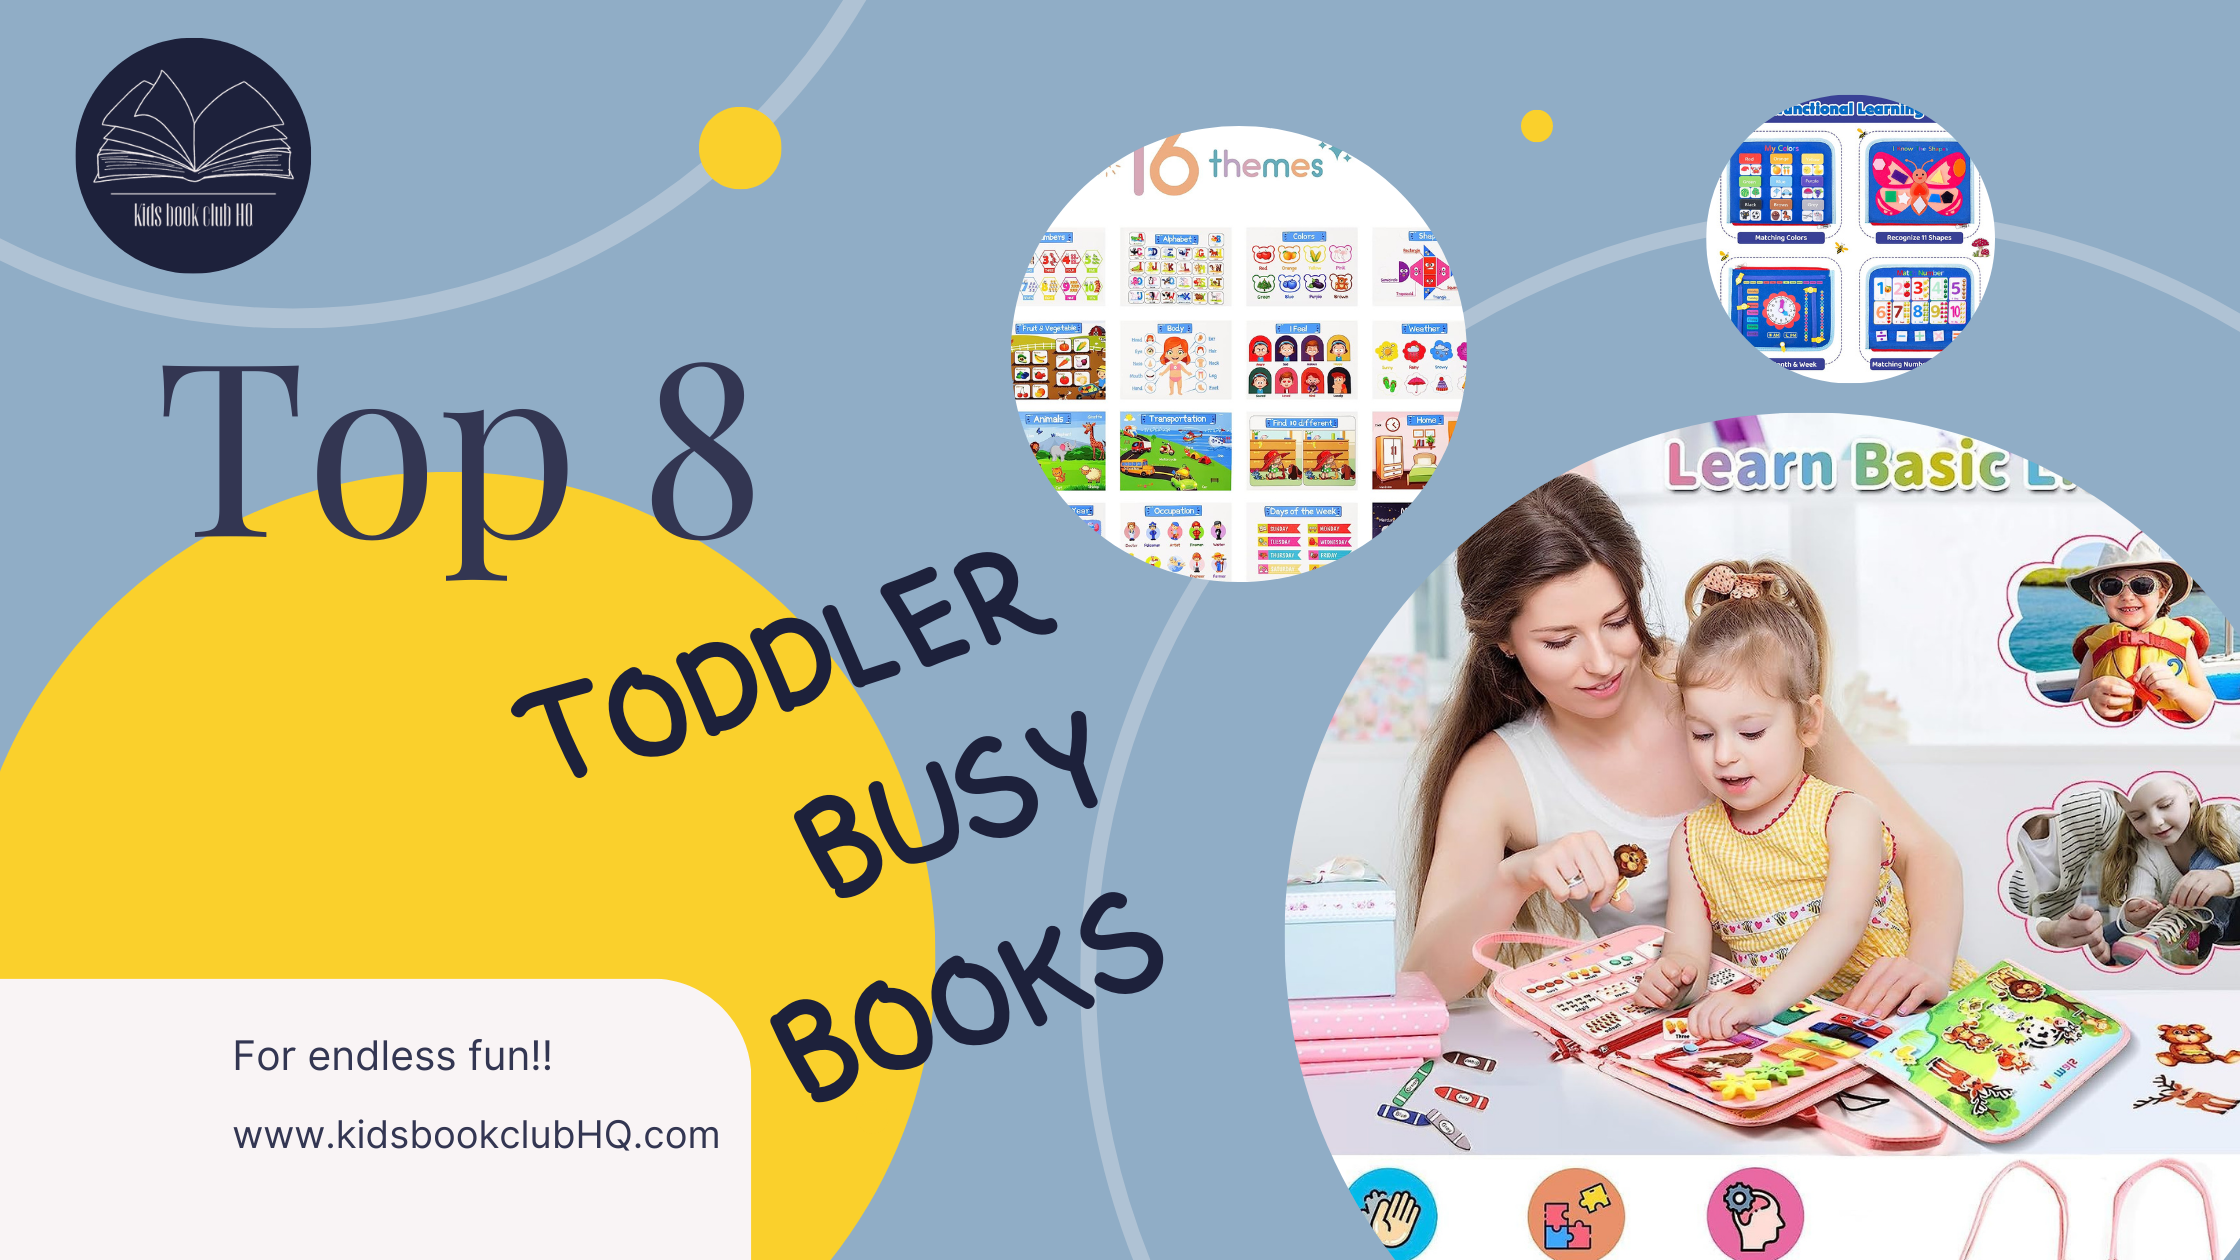 Top 8 toddler busy books